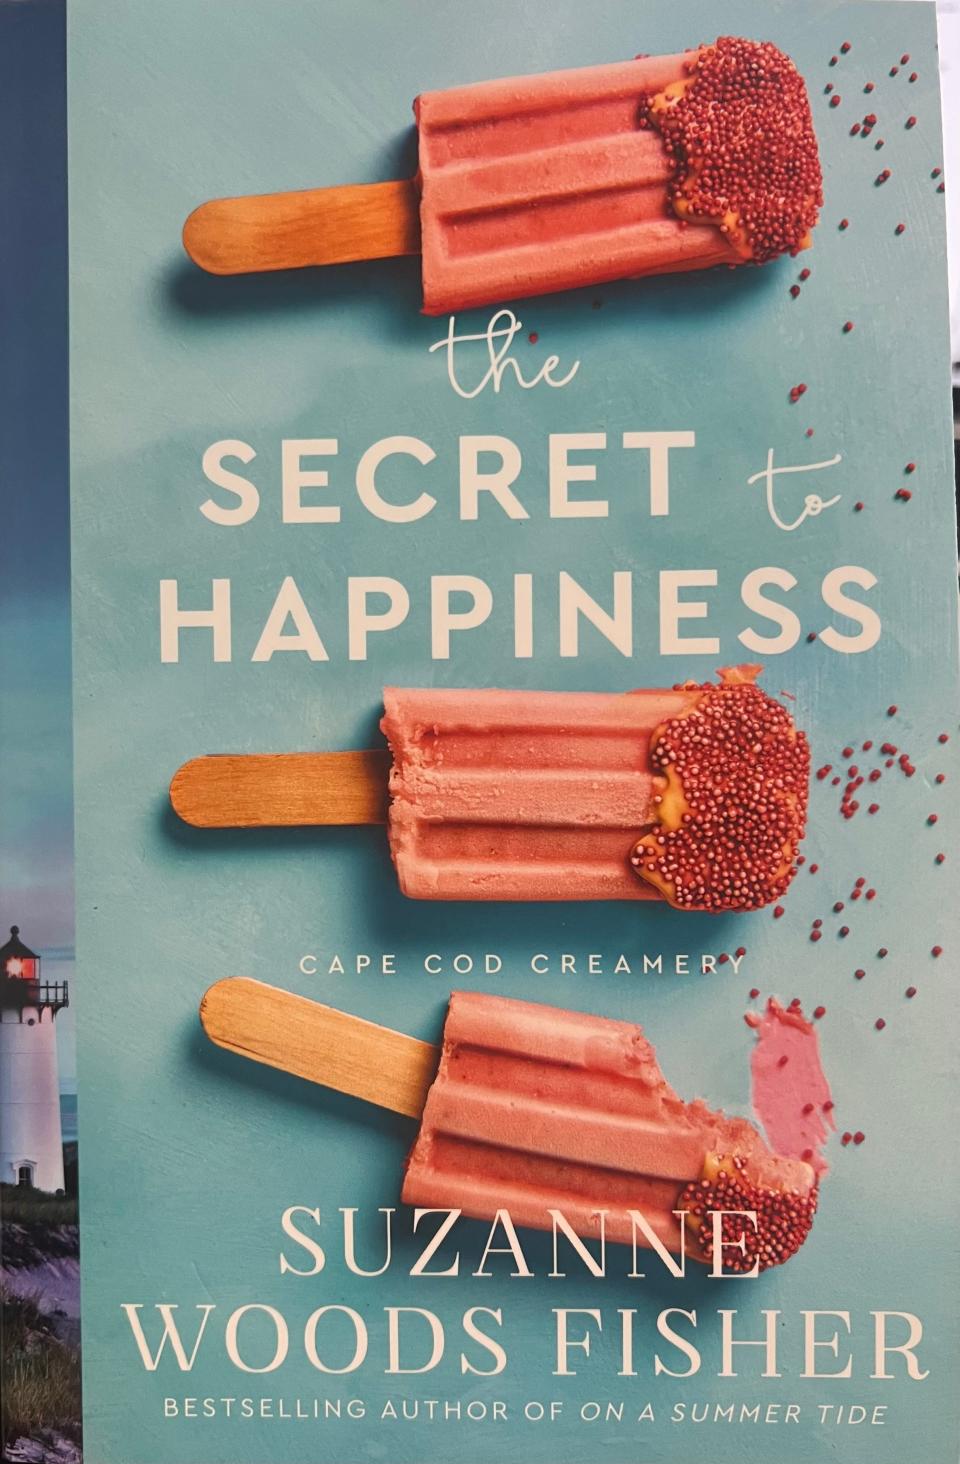 Suzanne Woods Fisher's book "The Secret to Happiness: Cape Cod Creamery."